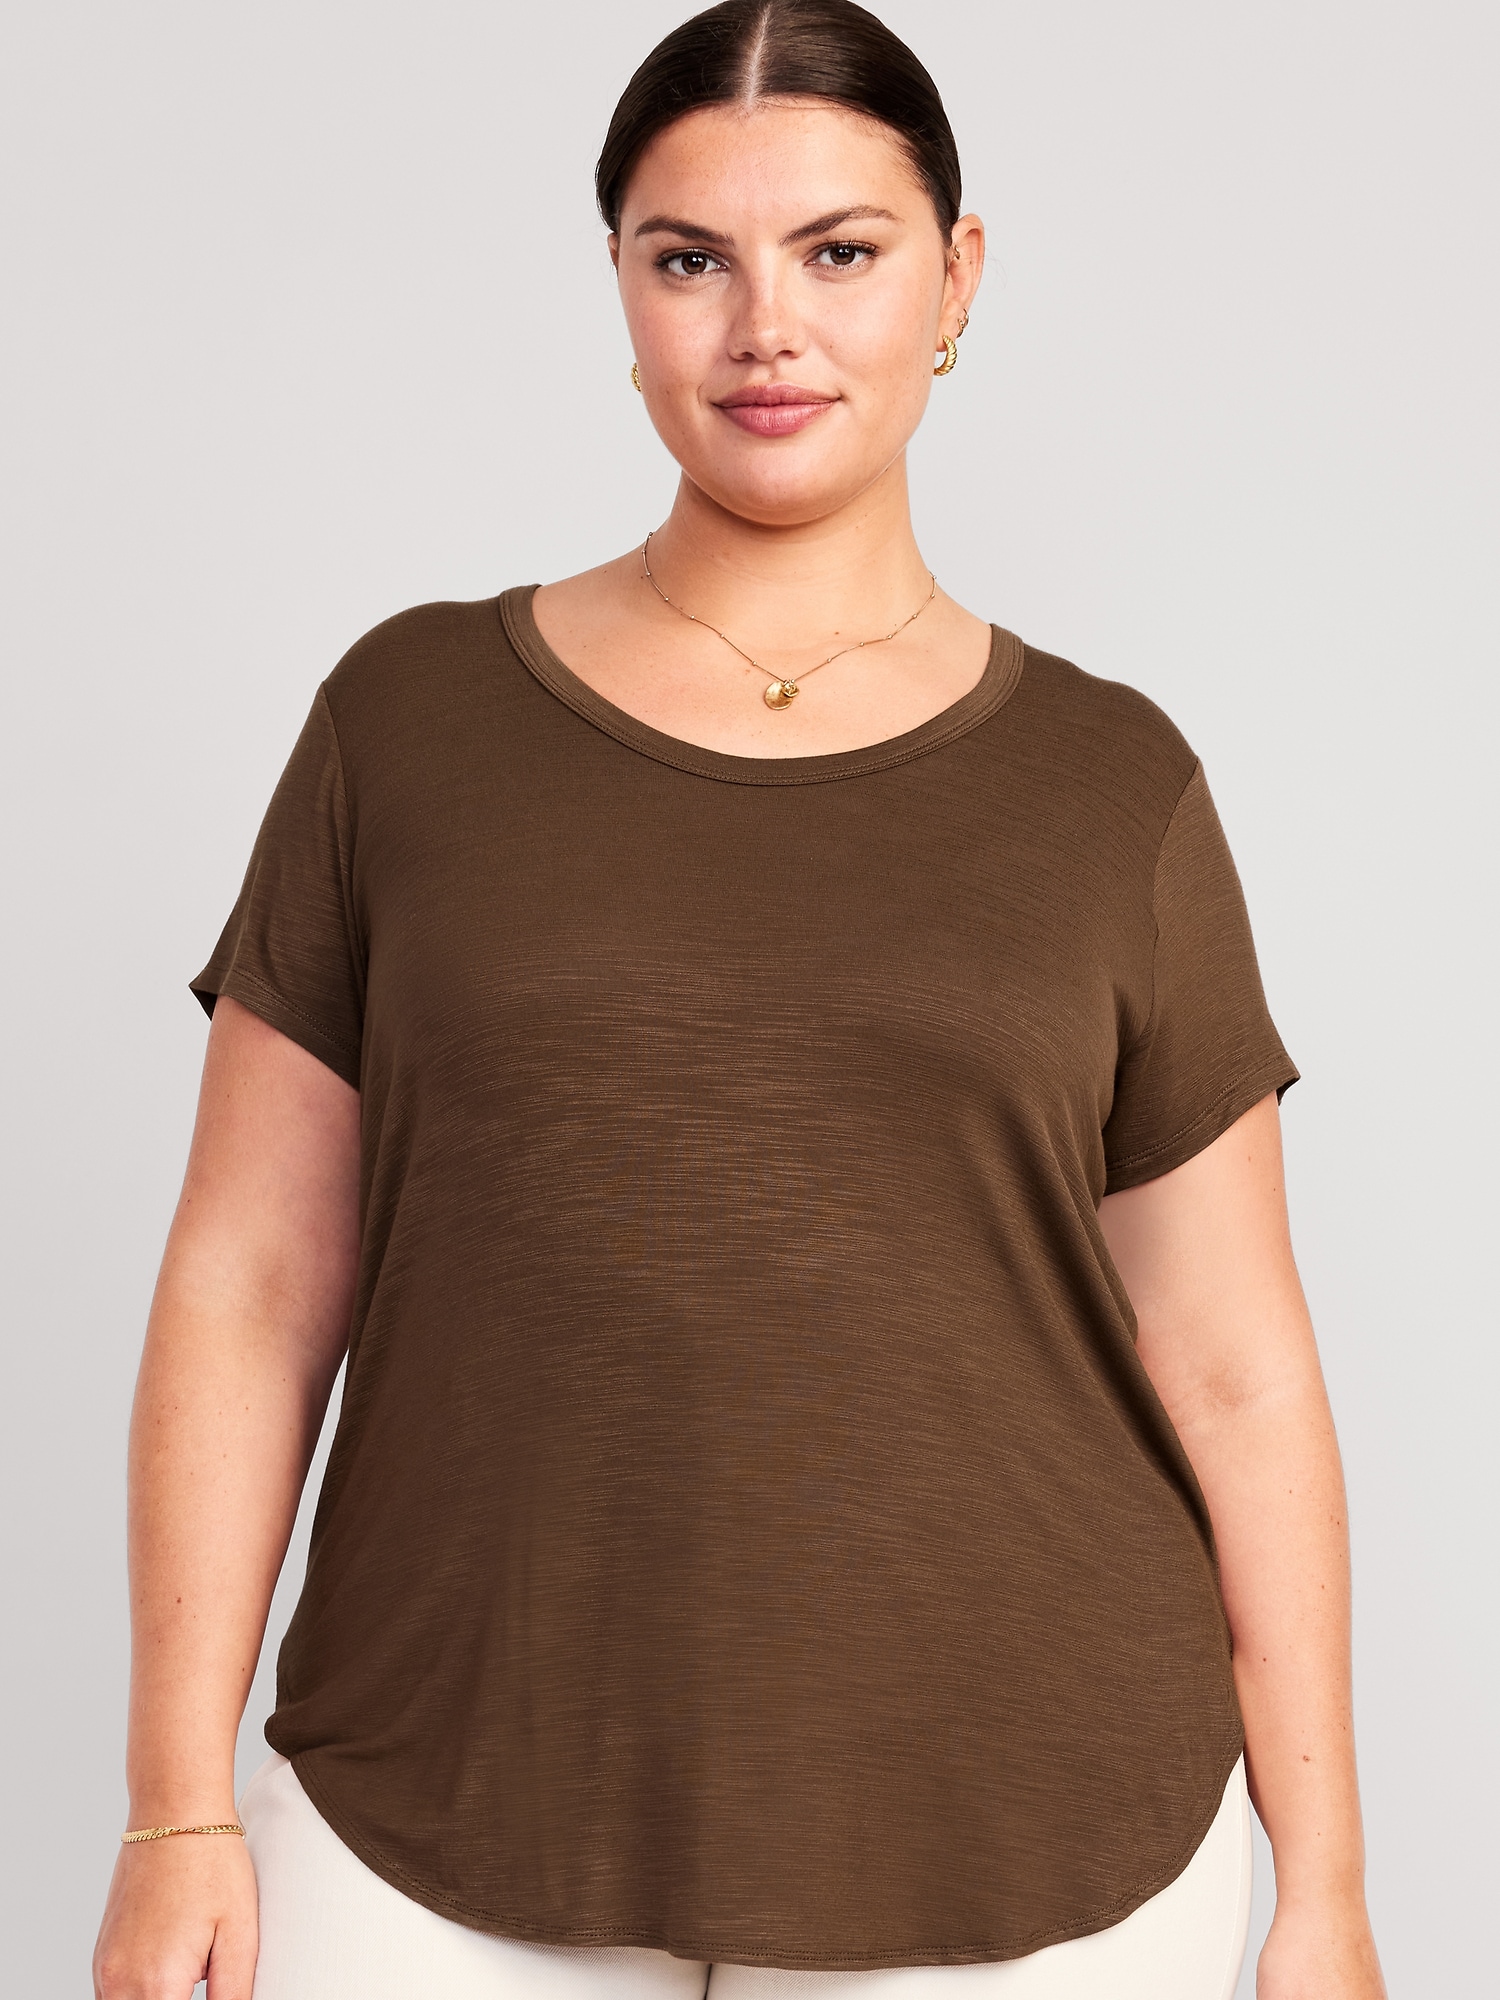 | Tunic Women T-Shirt Old Navy Luxe Voop-Neck for